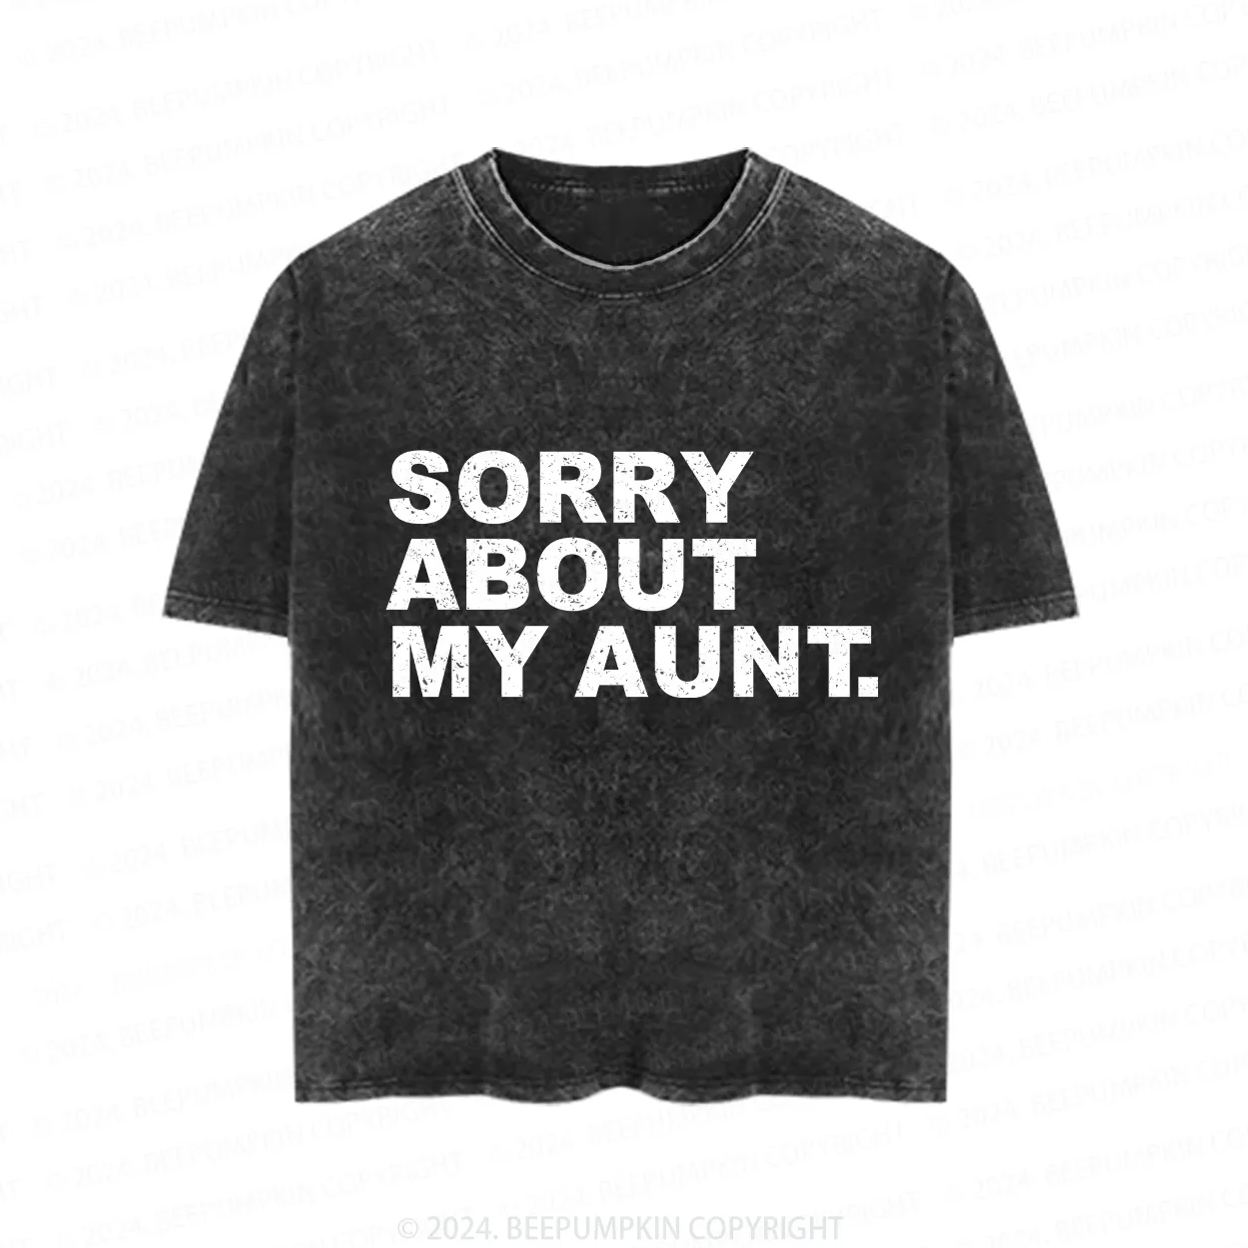 Sorry About My Aunt Toddler&Kids Washed Tees        